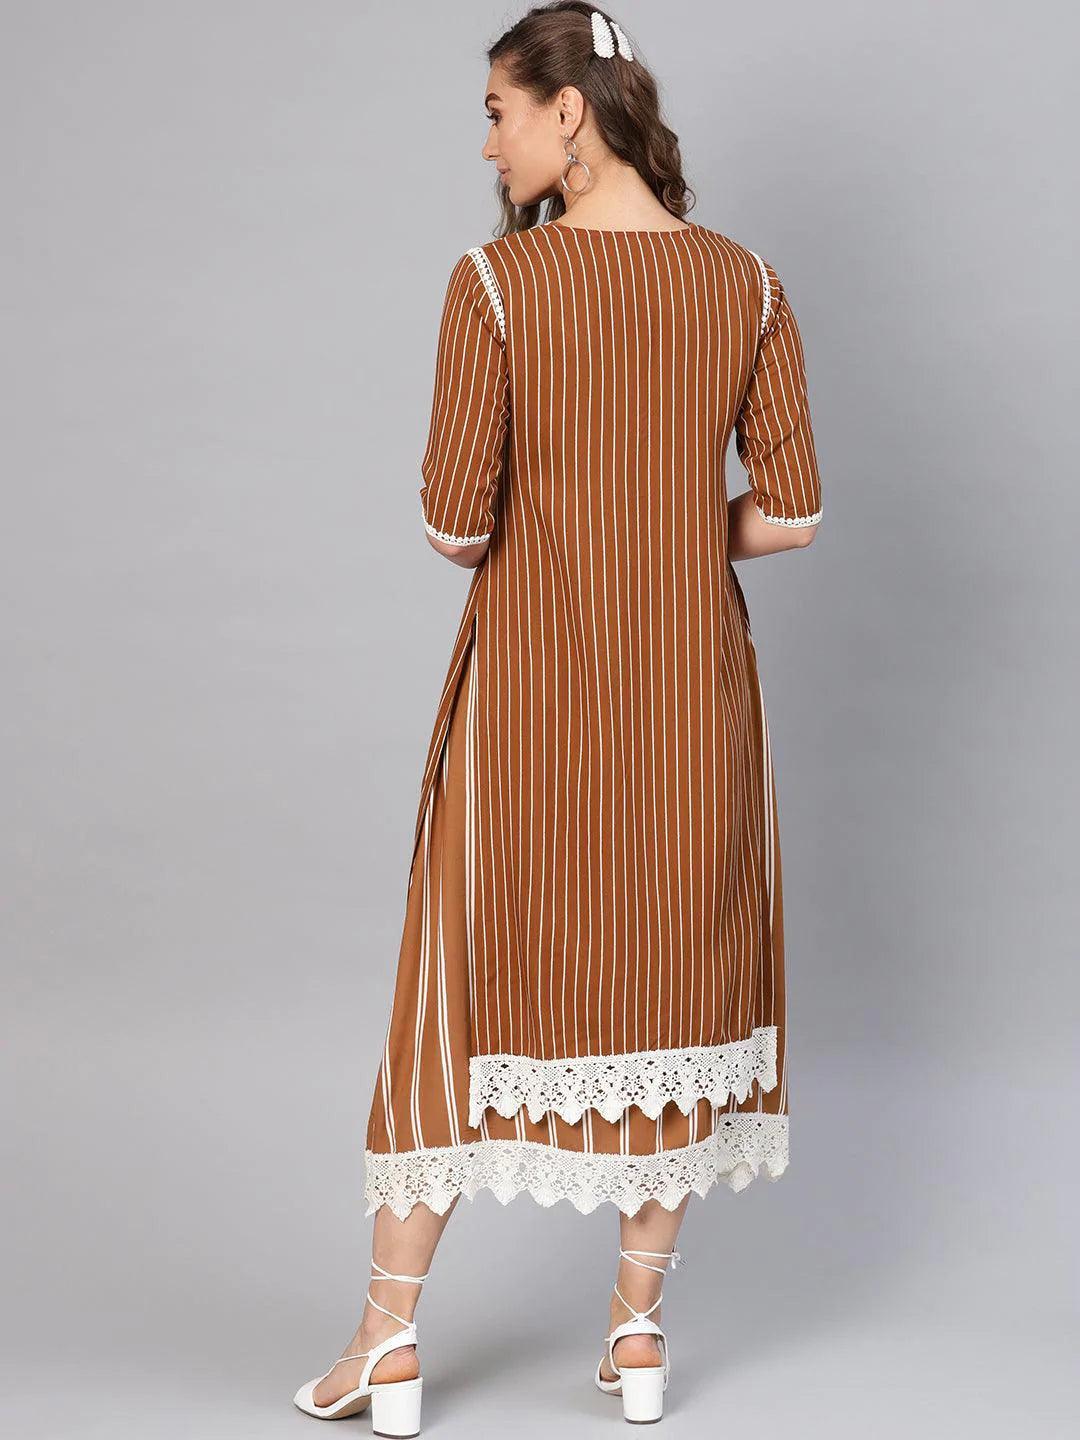 Brown Striped Rayon Dress With Jacket